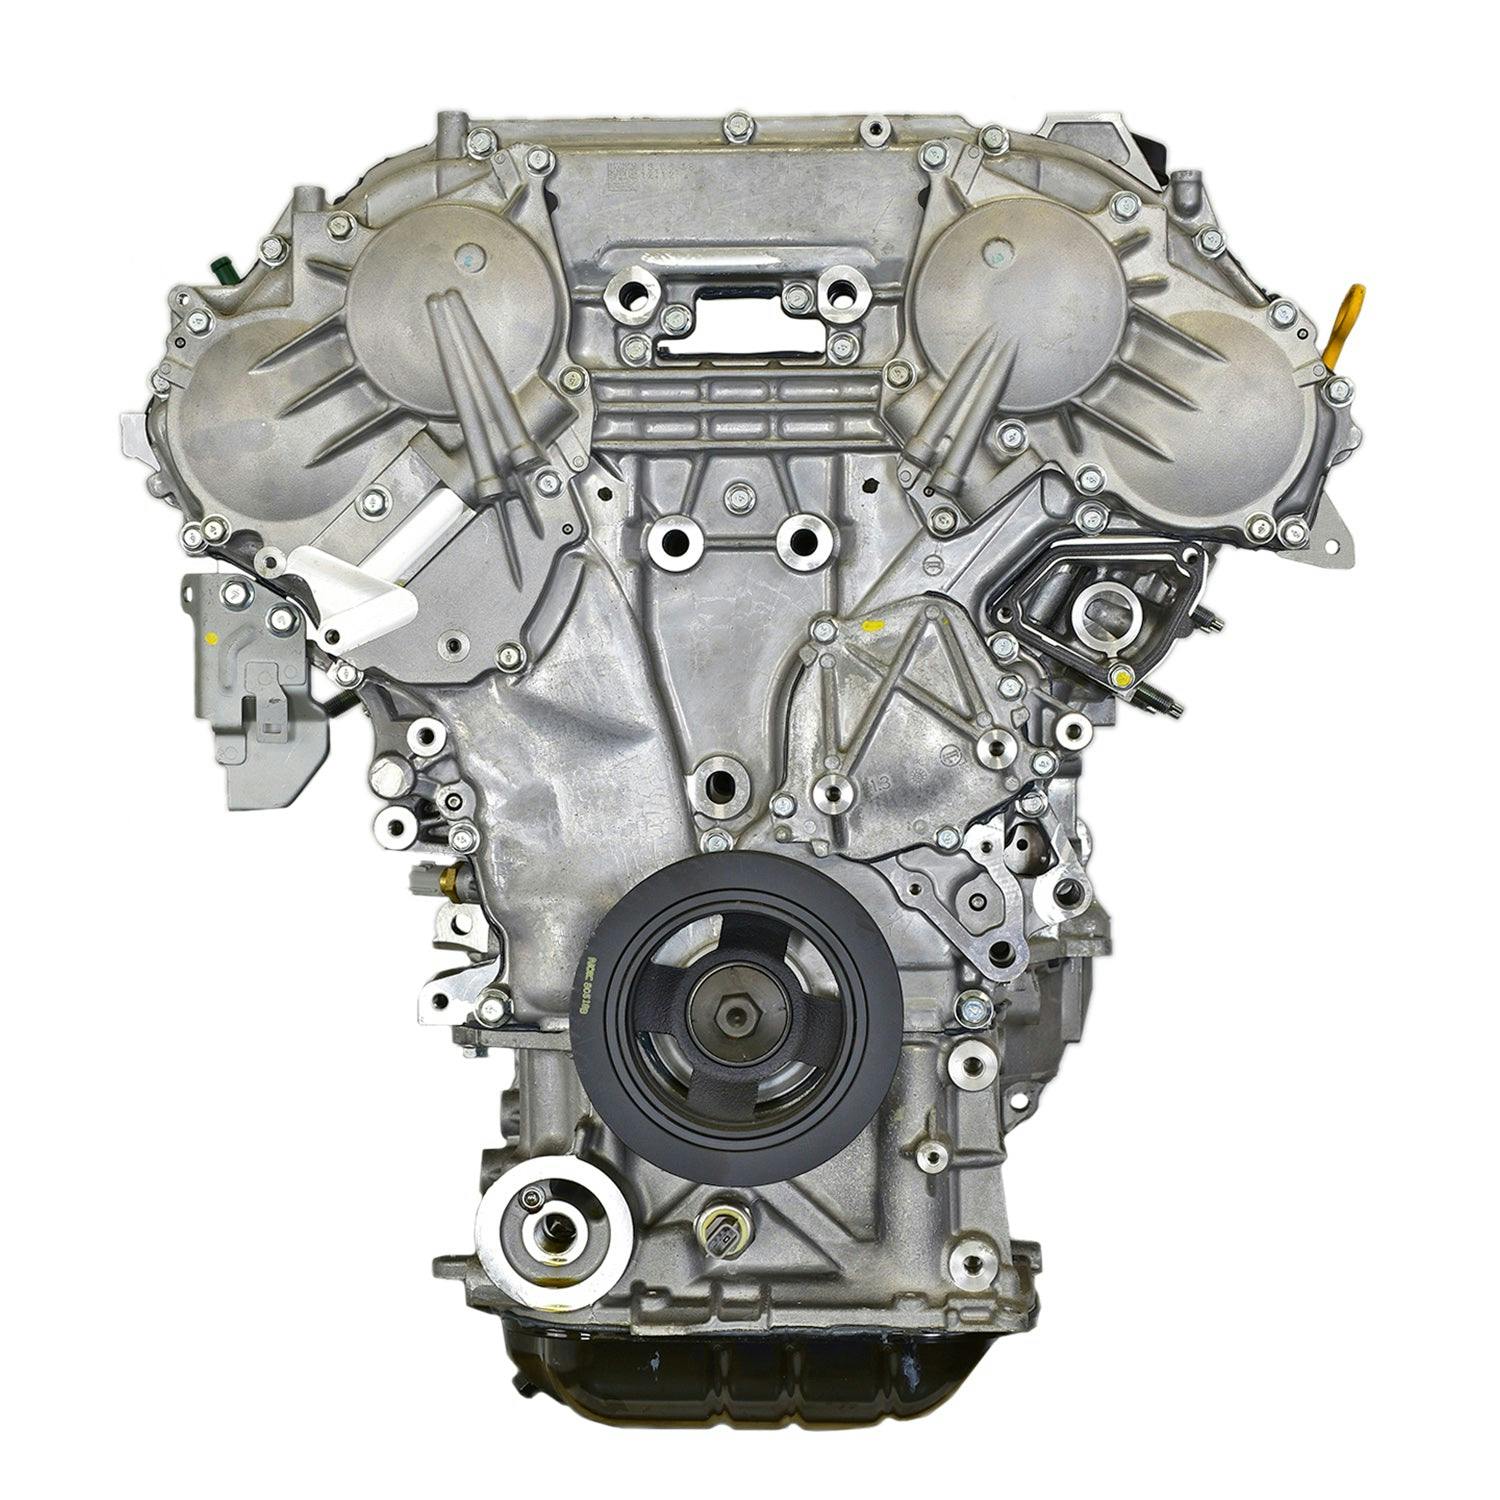 3.5L V6 Engine for 2009-2014 Nissan Murano/Quest